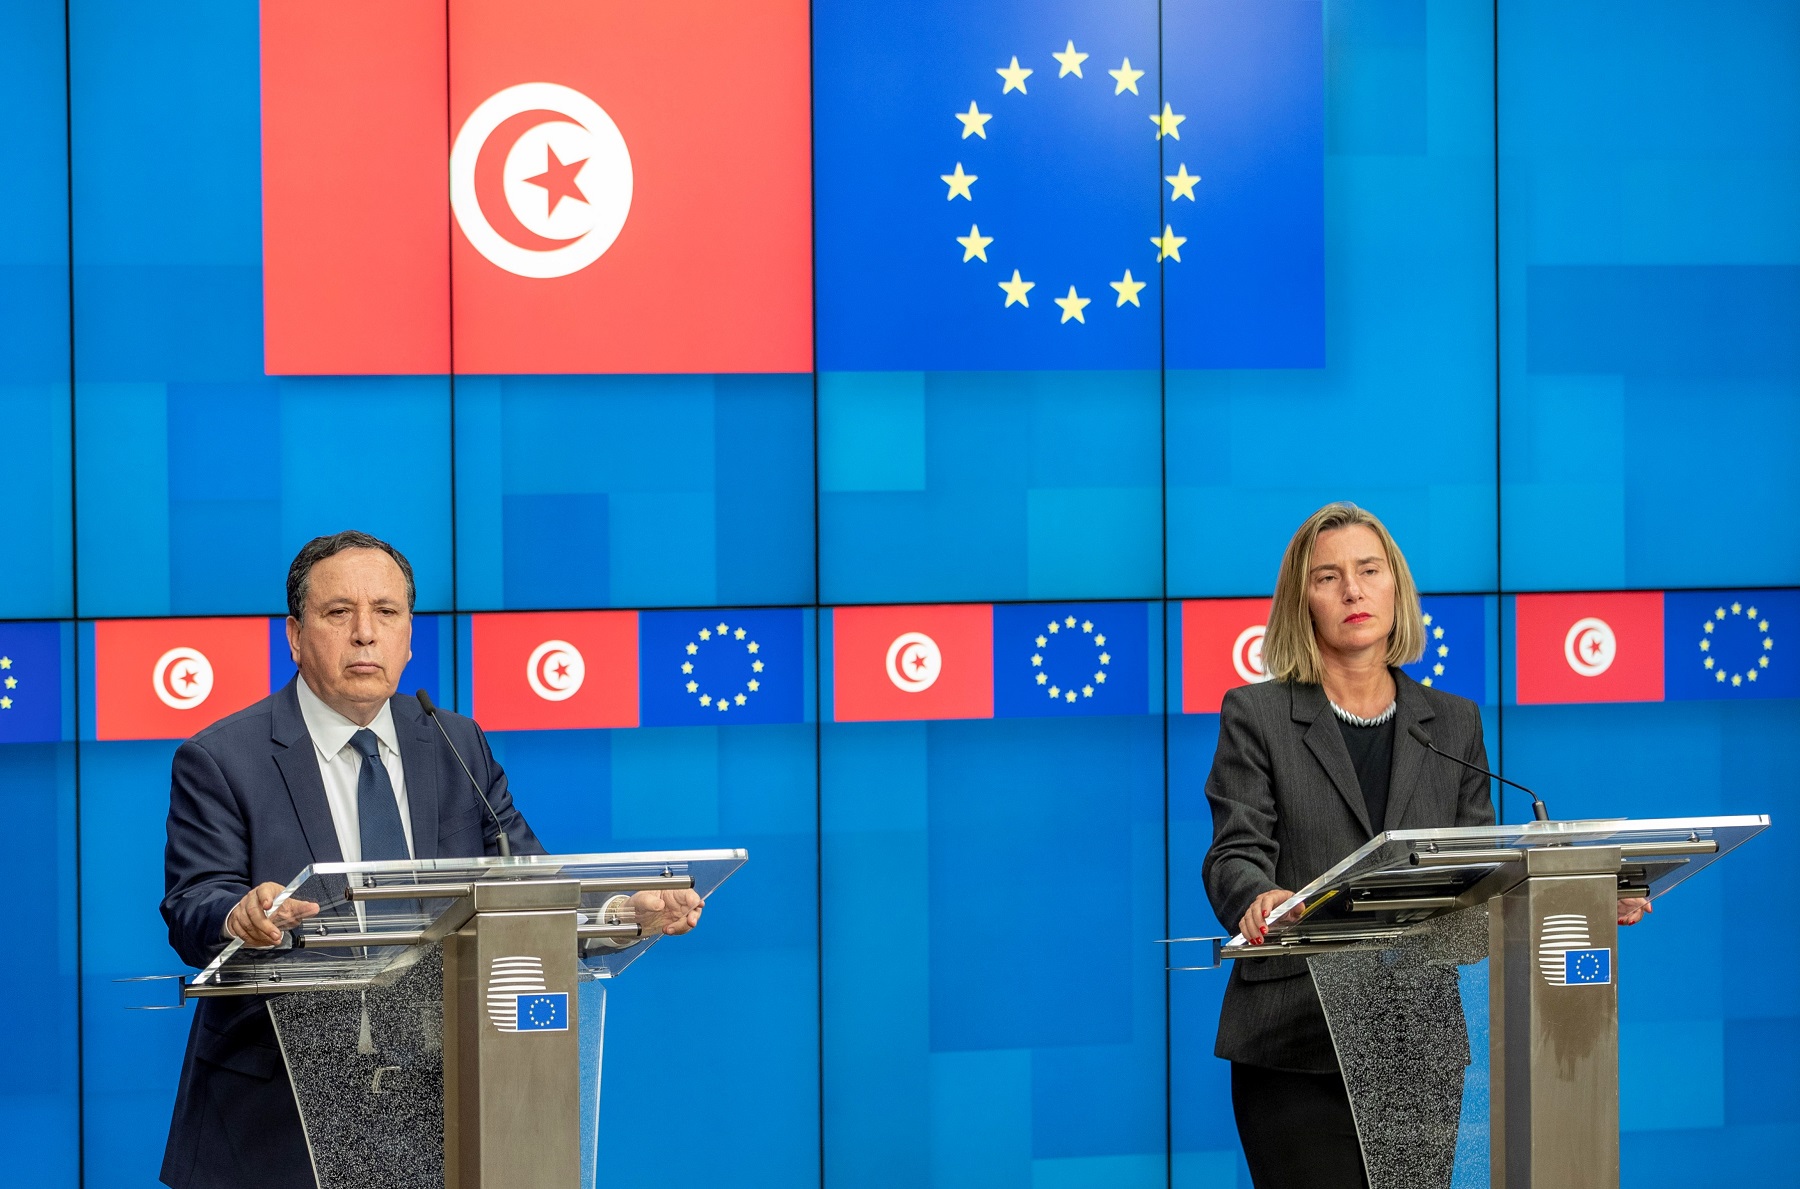 Tunisian FM Khemaies Jhinaoui and High Representative Federica Mogherini at the press conference